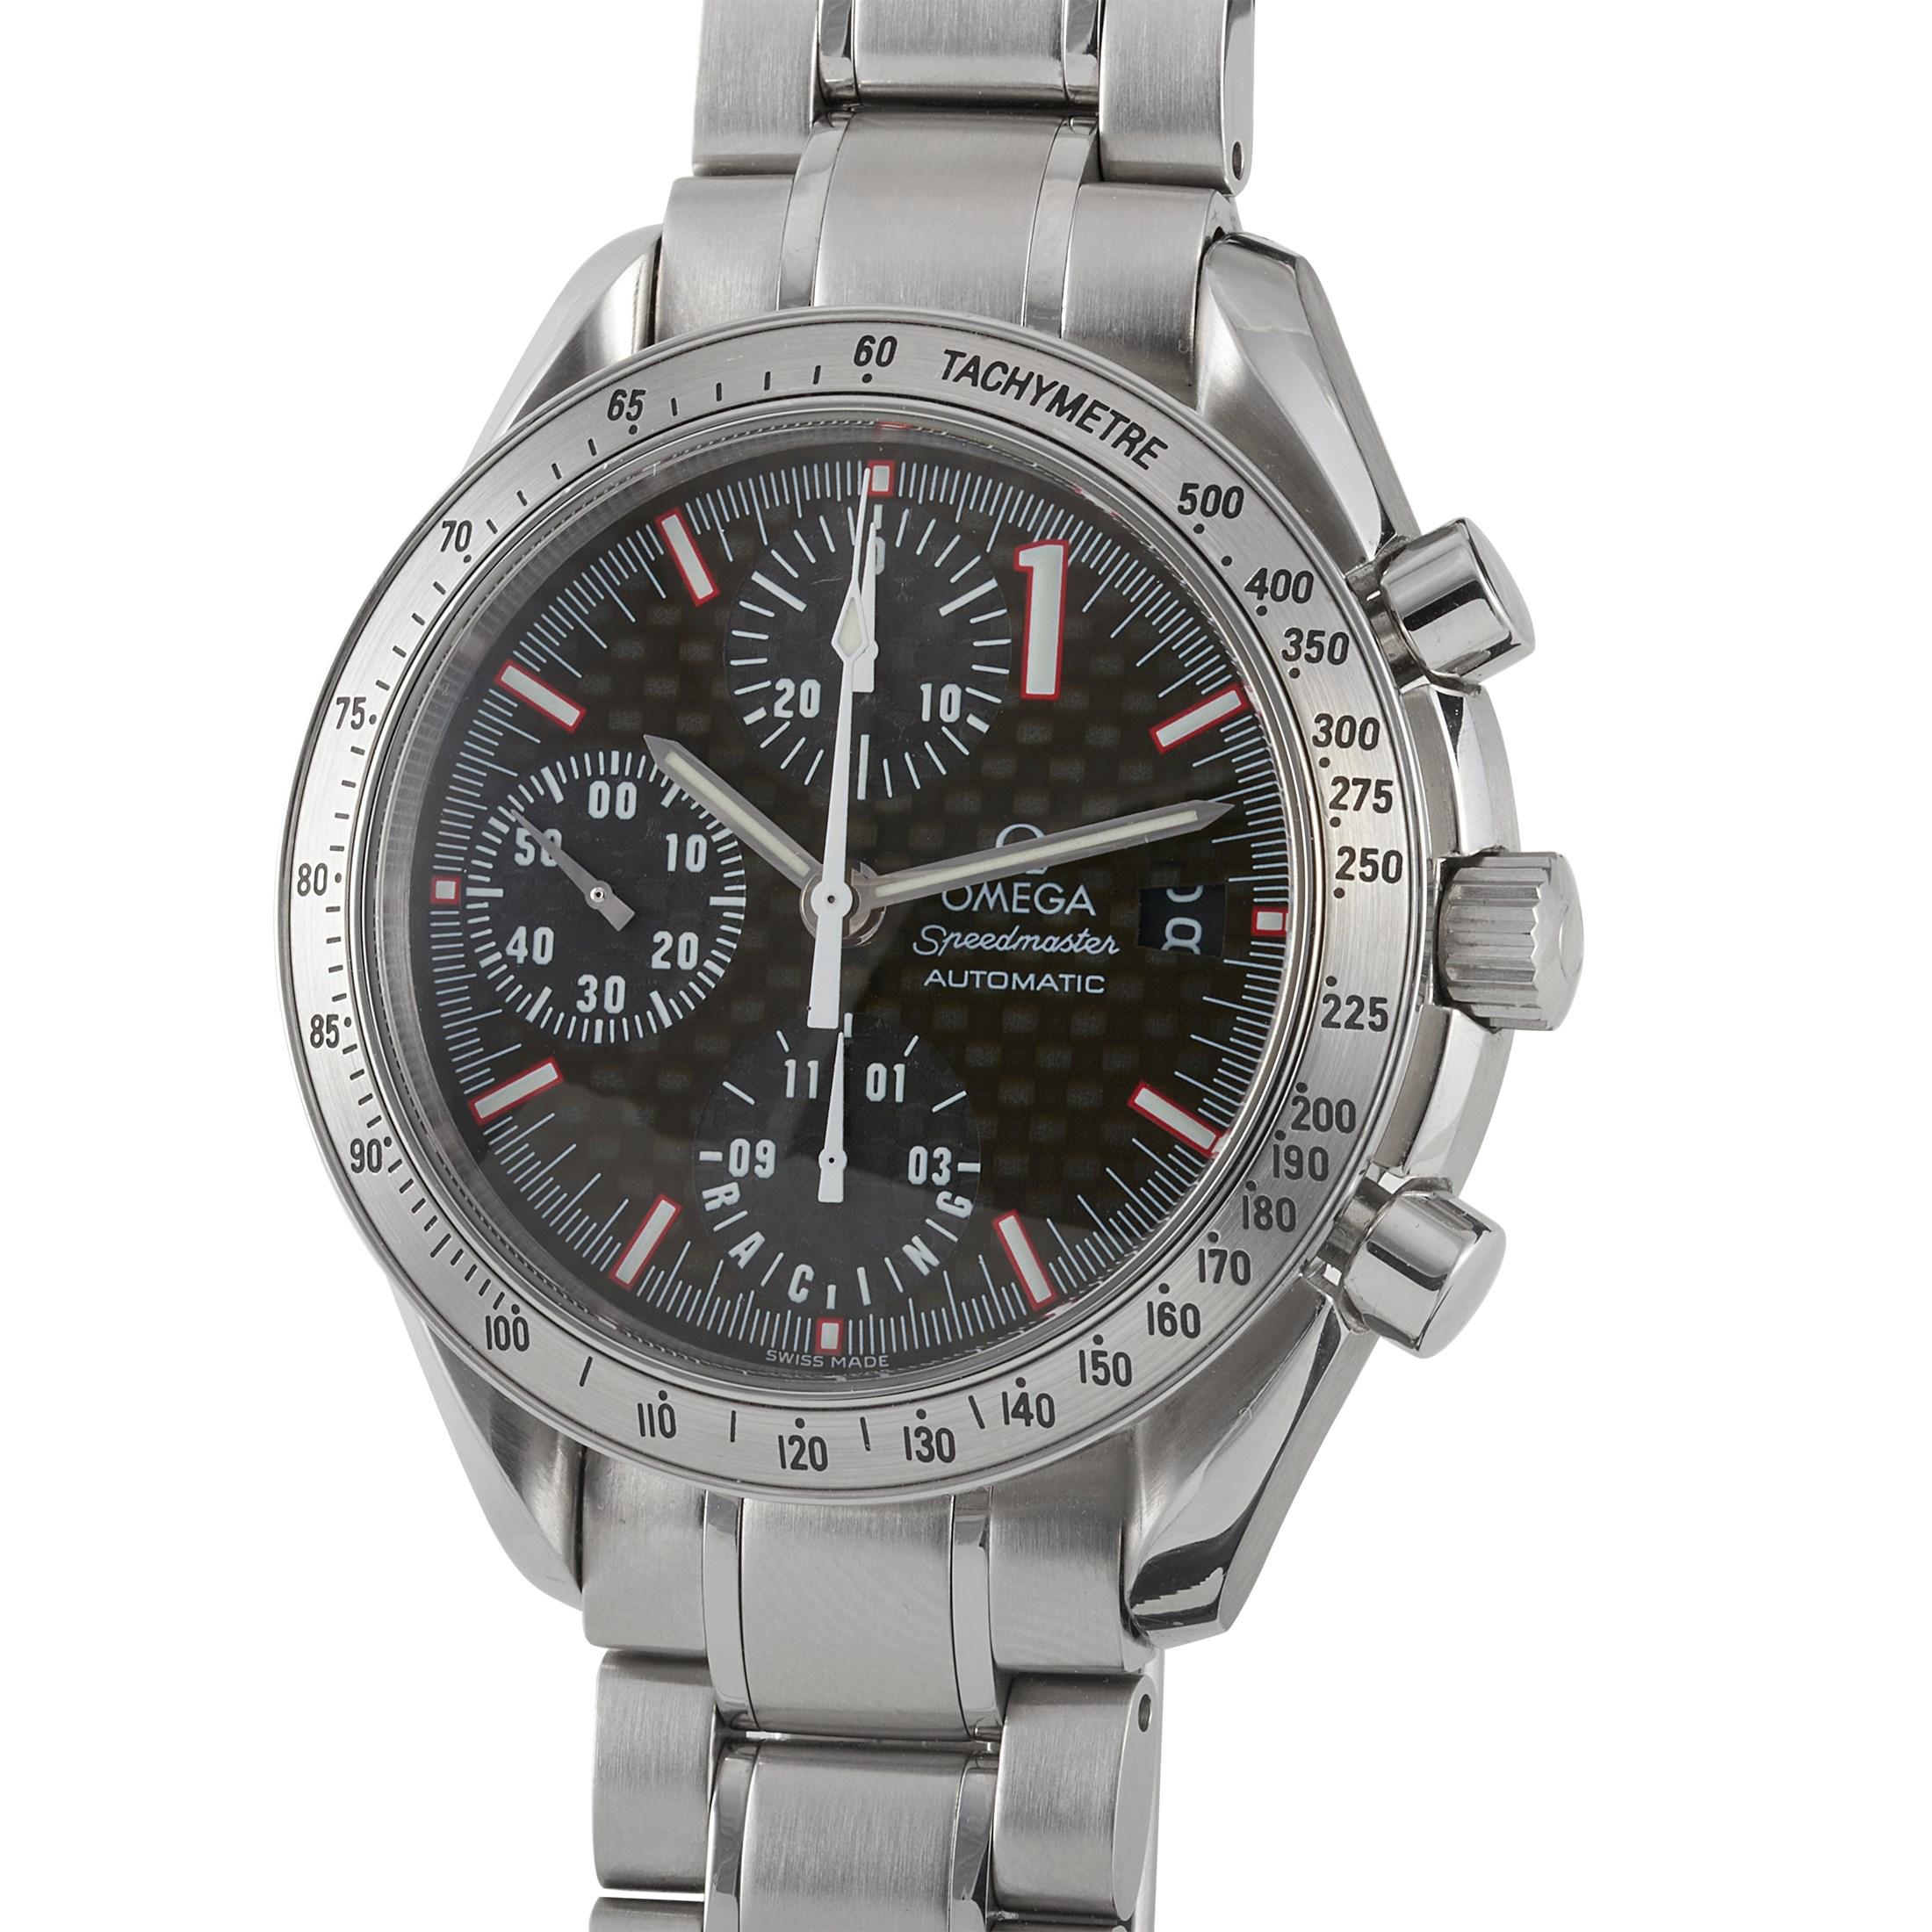 The Omega Speedmaster Date Michael Schumacher Racing, reference number 3519.50.00, is presented in an edition limited to 11,111 pieces, in celebration of Michael Schumacher’s win of the 2001 Formula One World Championship.

The watch boasts a